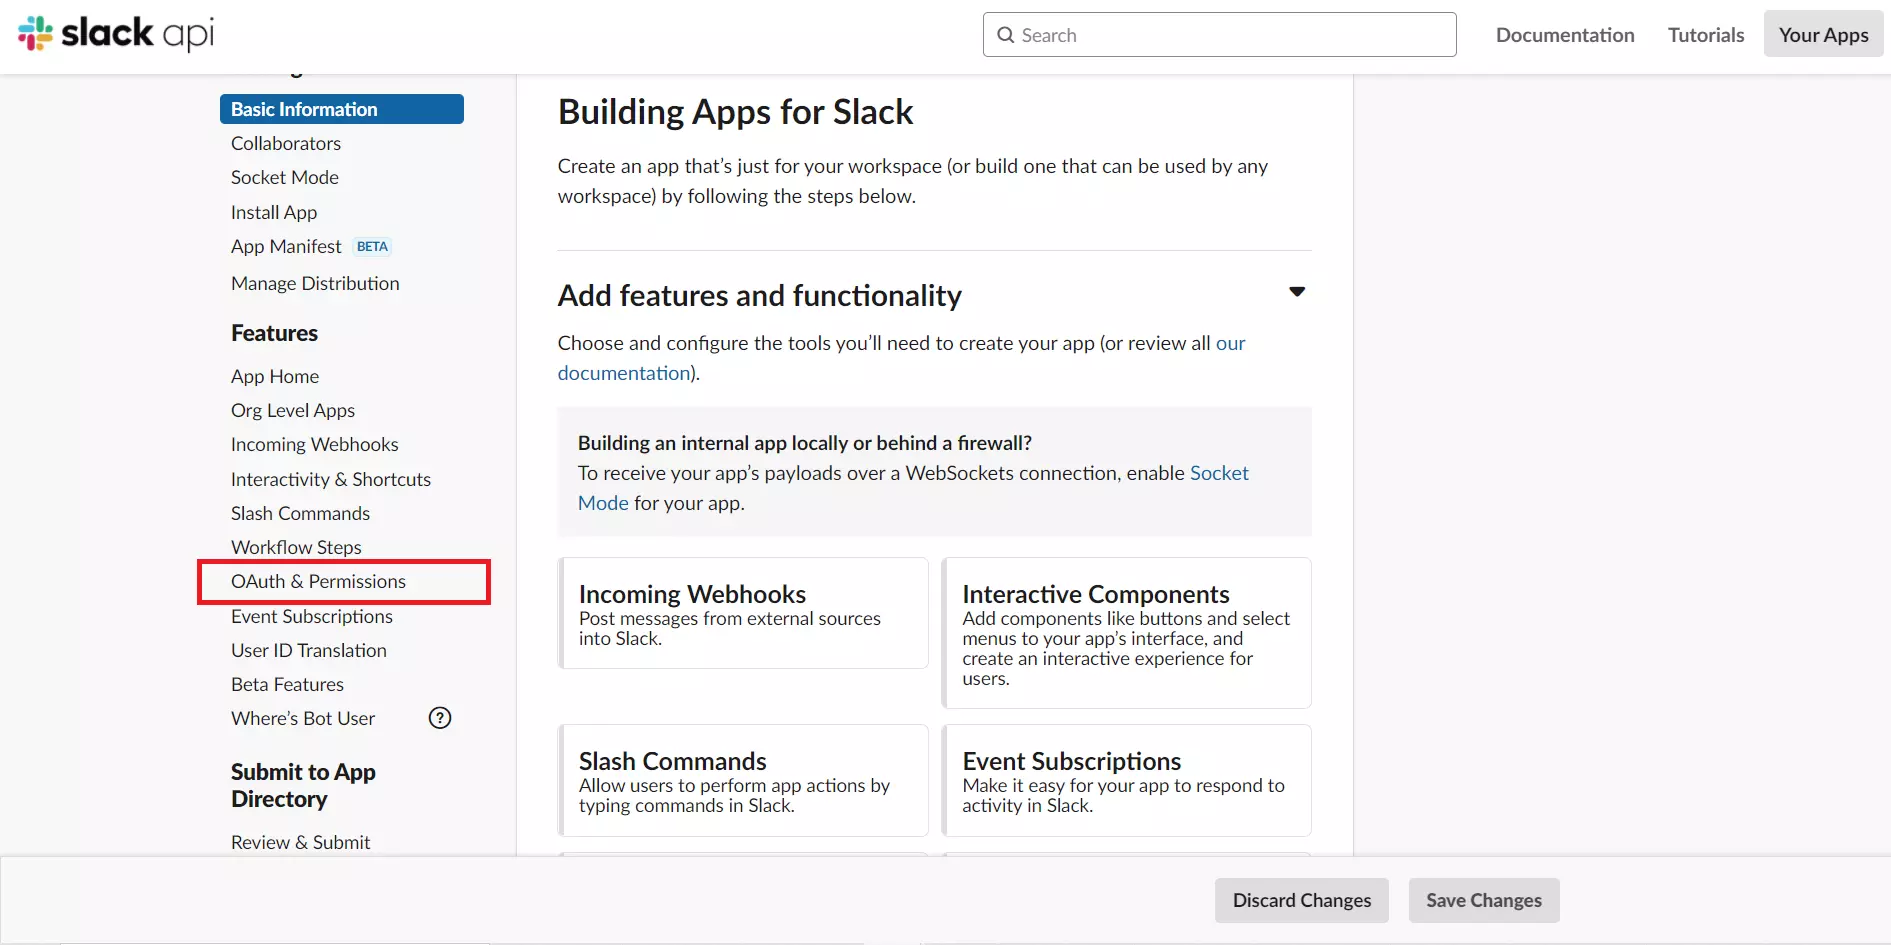 navigate to oauth and permission for slack SSO